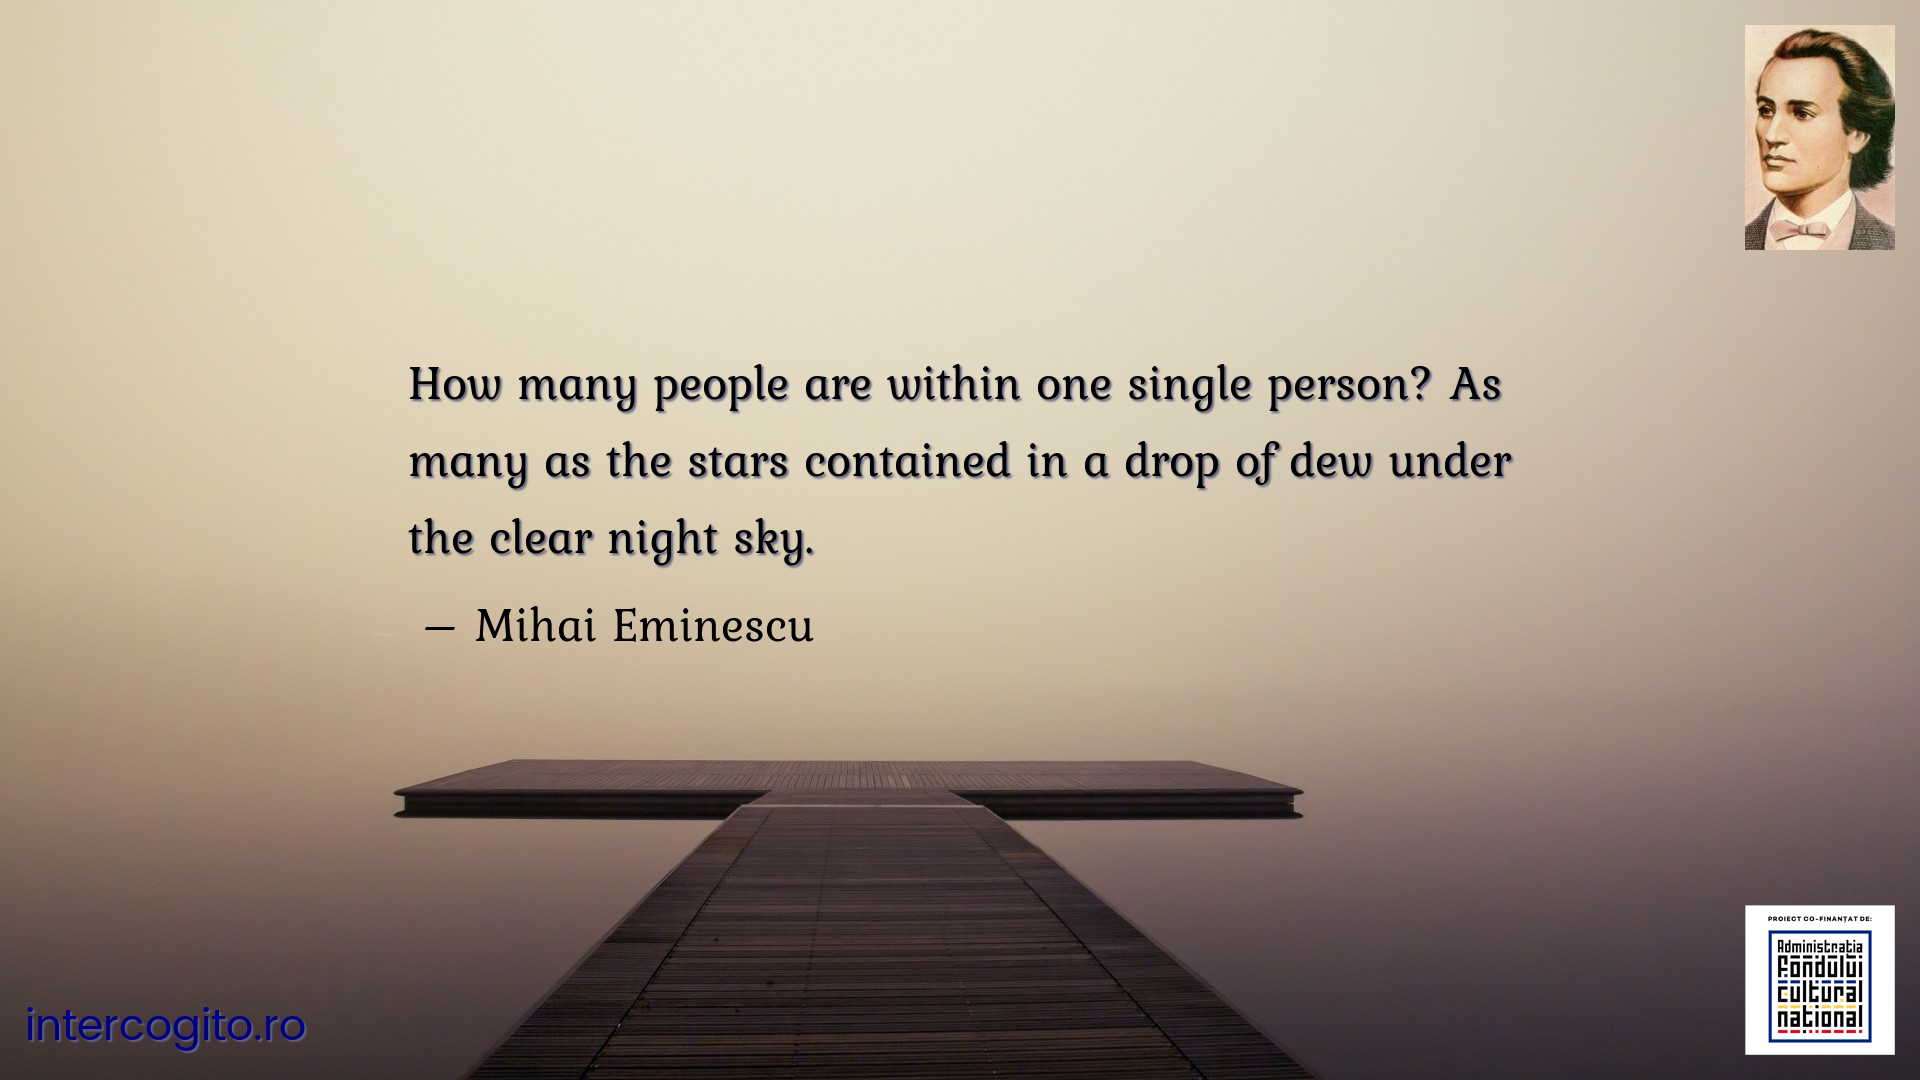 How many people are within one single person? As many as the stars contained in a drop of dew under the clear night sky.